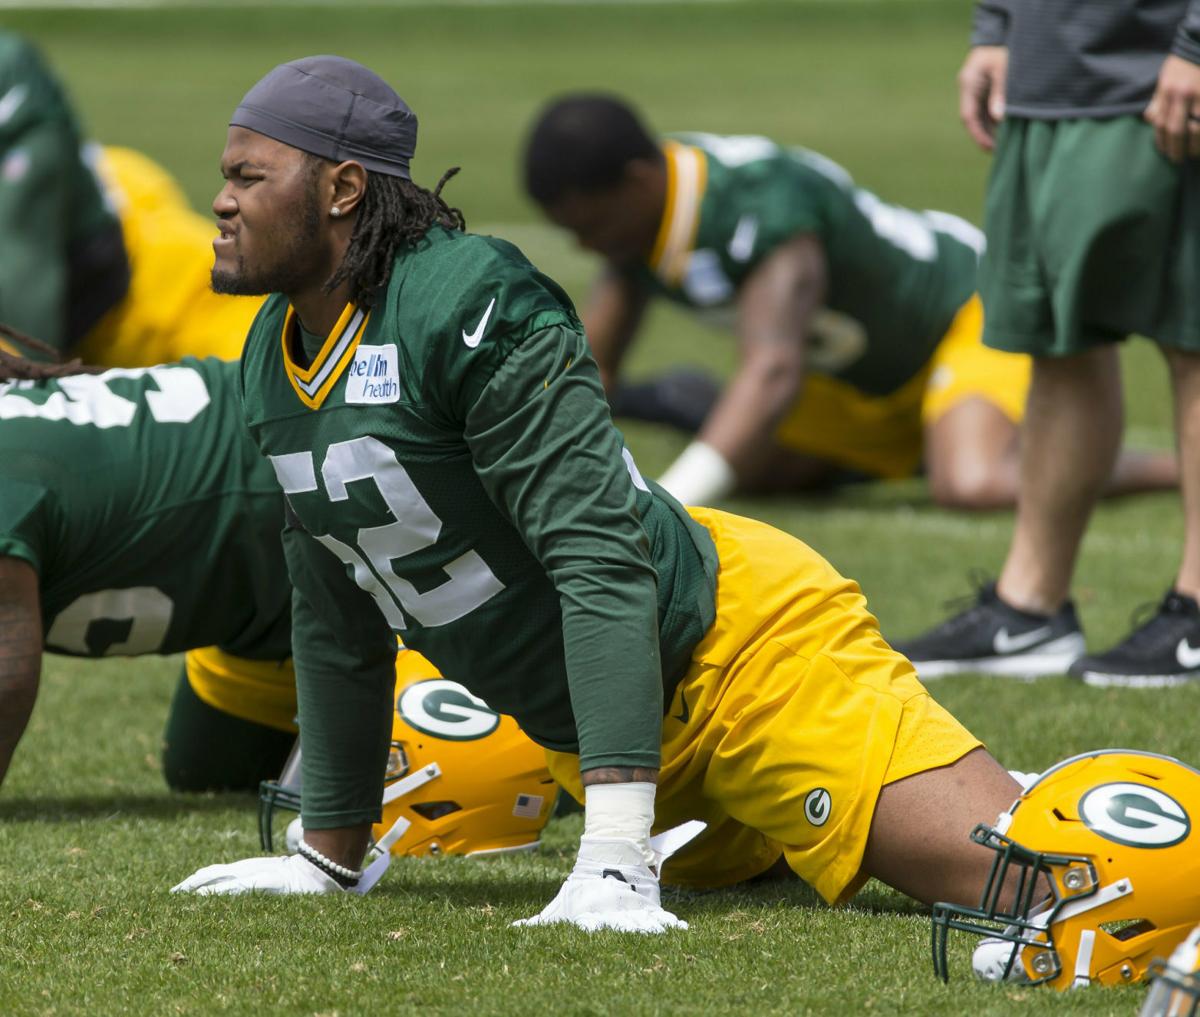 Packers' Gary participating in team drills, but isn't commenting